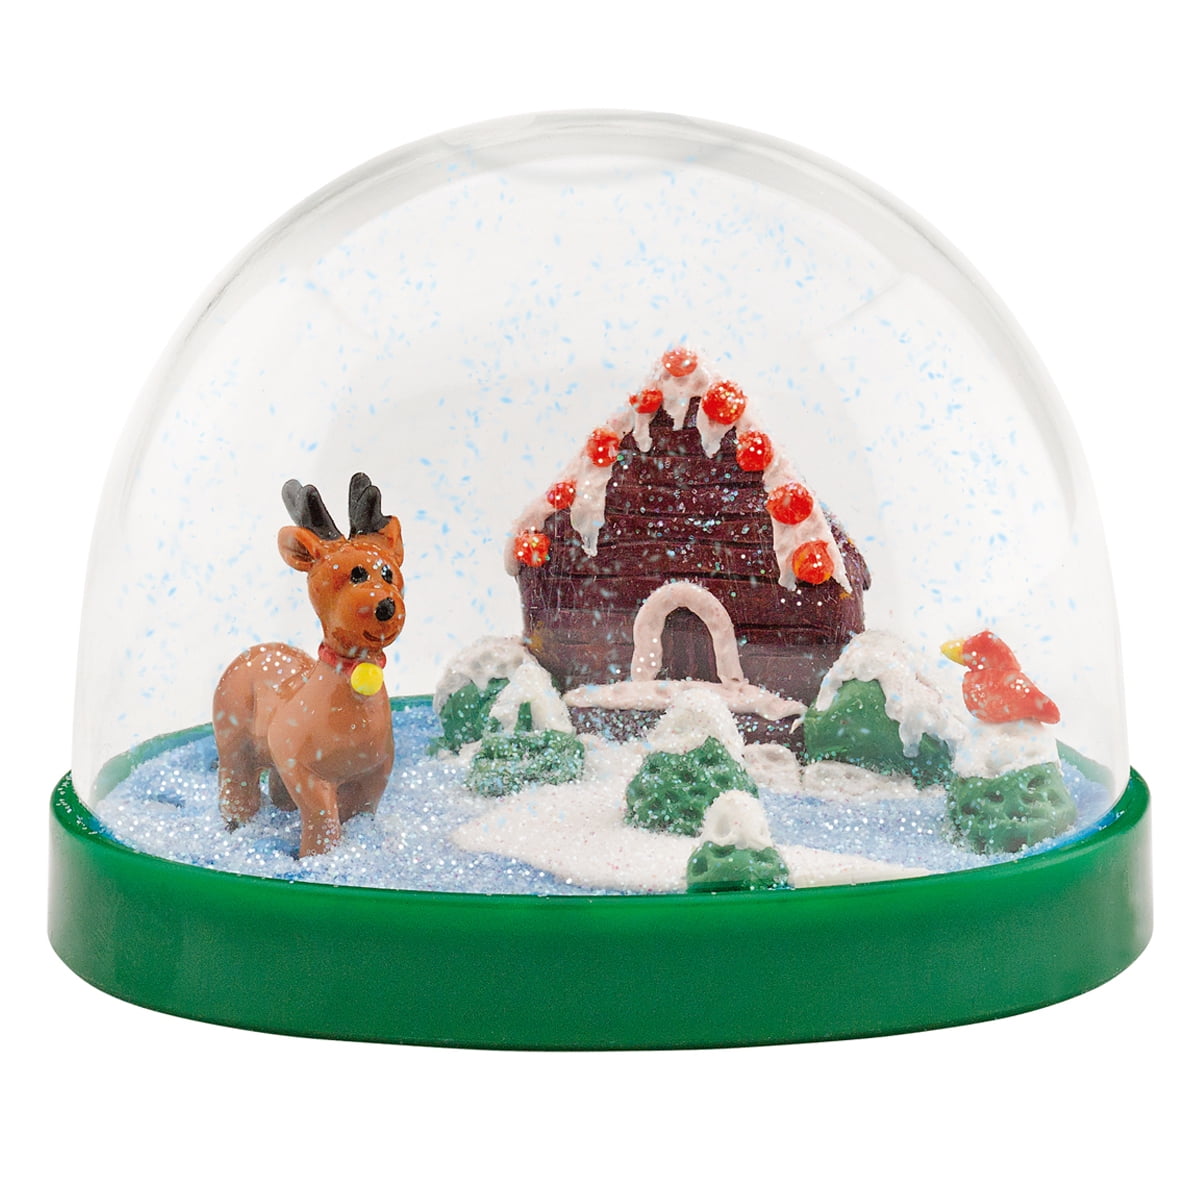 Creativity For Kids Make Your Own Holiday Snow Globe Craft for Kids